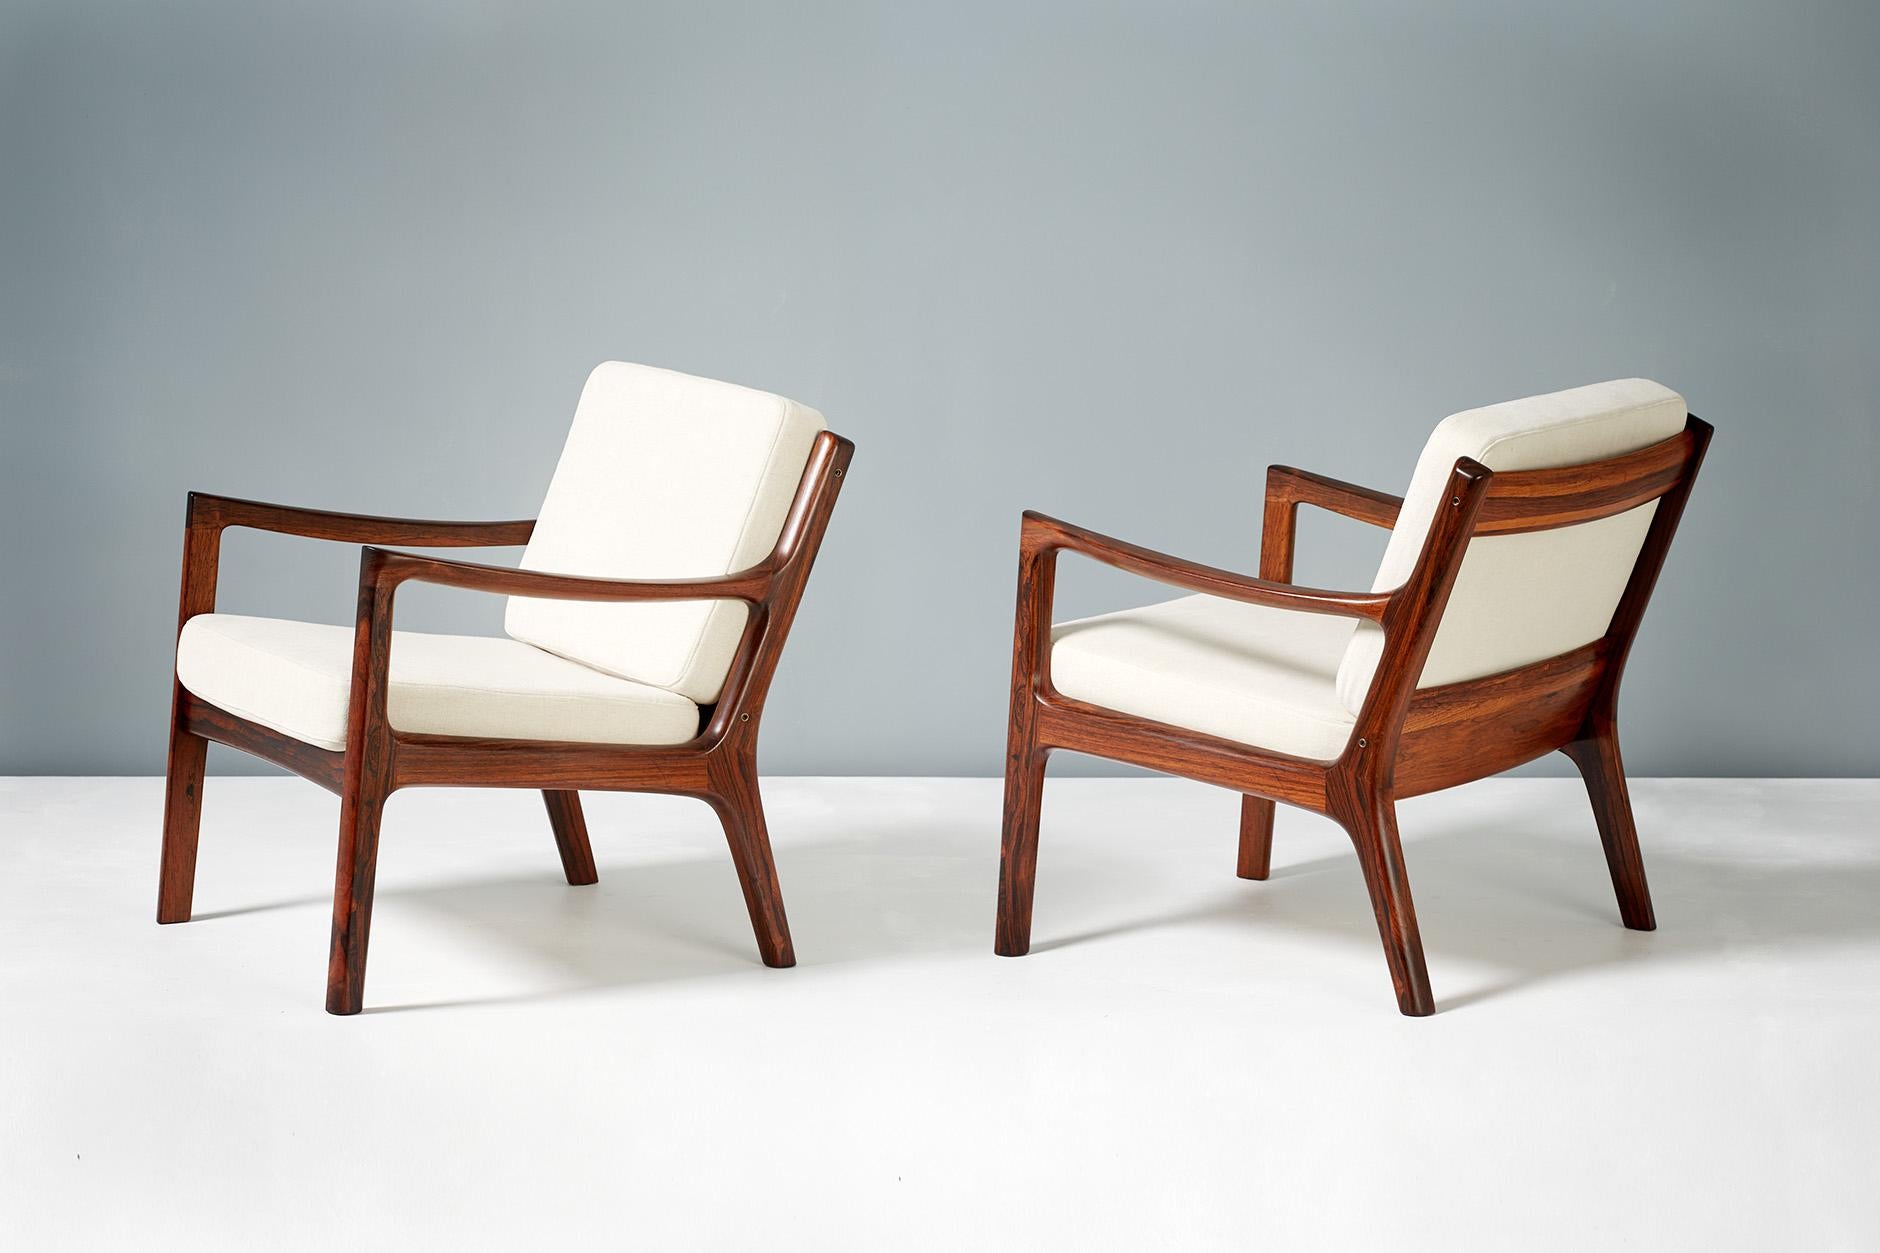 Limited edition pair of this iconic design in highly figured Brazilian rosewood rosewood, produced by France & Son in Denmark, circa 1960. Includes maker's badge under seat. The new cushions have been recovered in pale cotton/linen fabric.